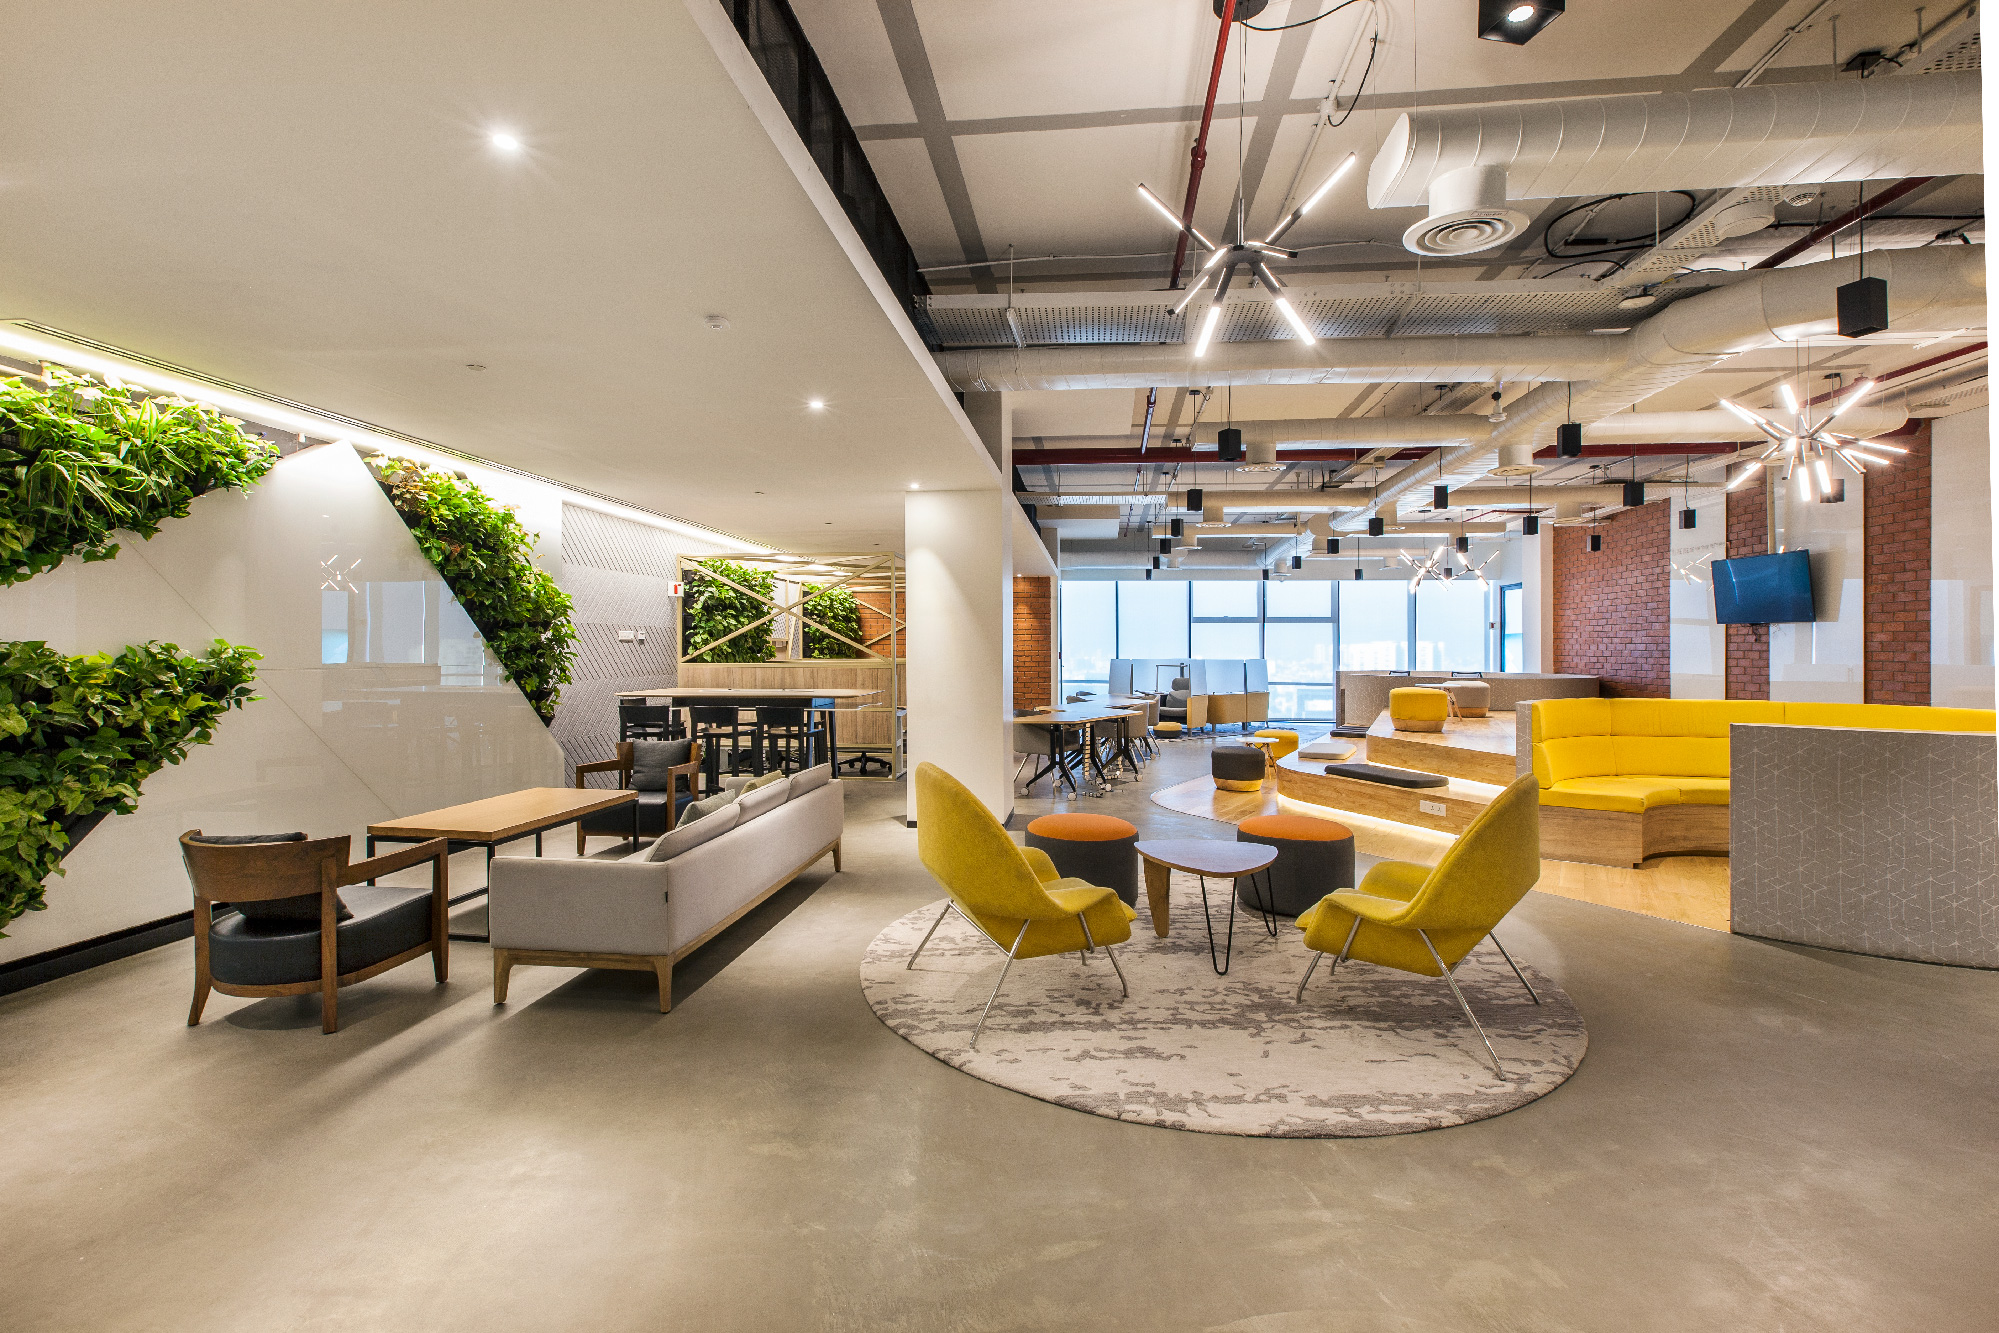  Northern Trust office: inclusivity in workplace designs